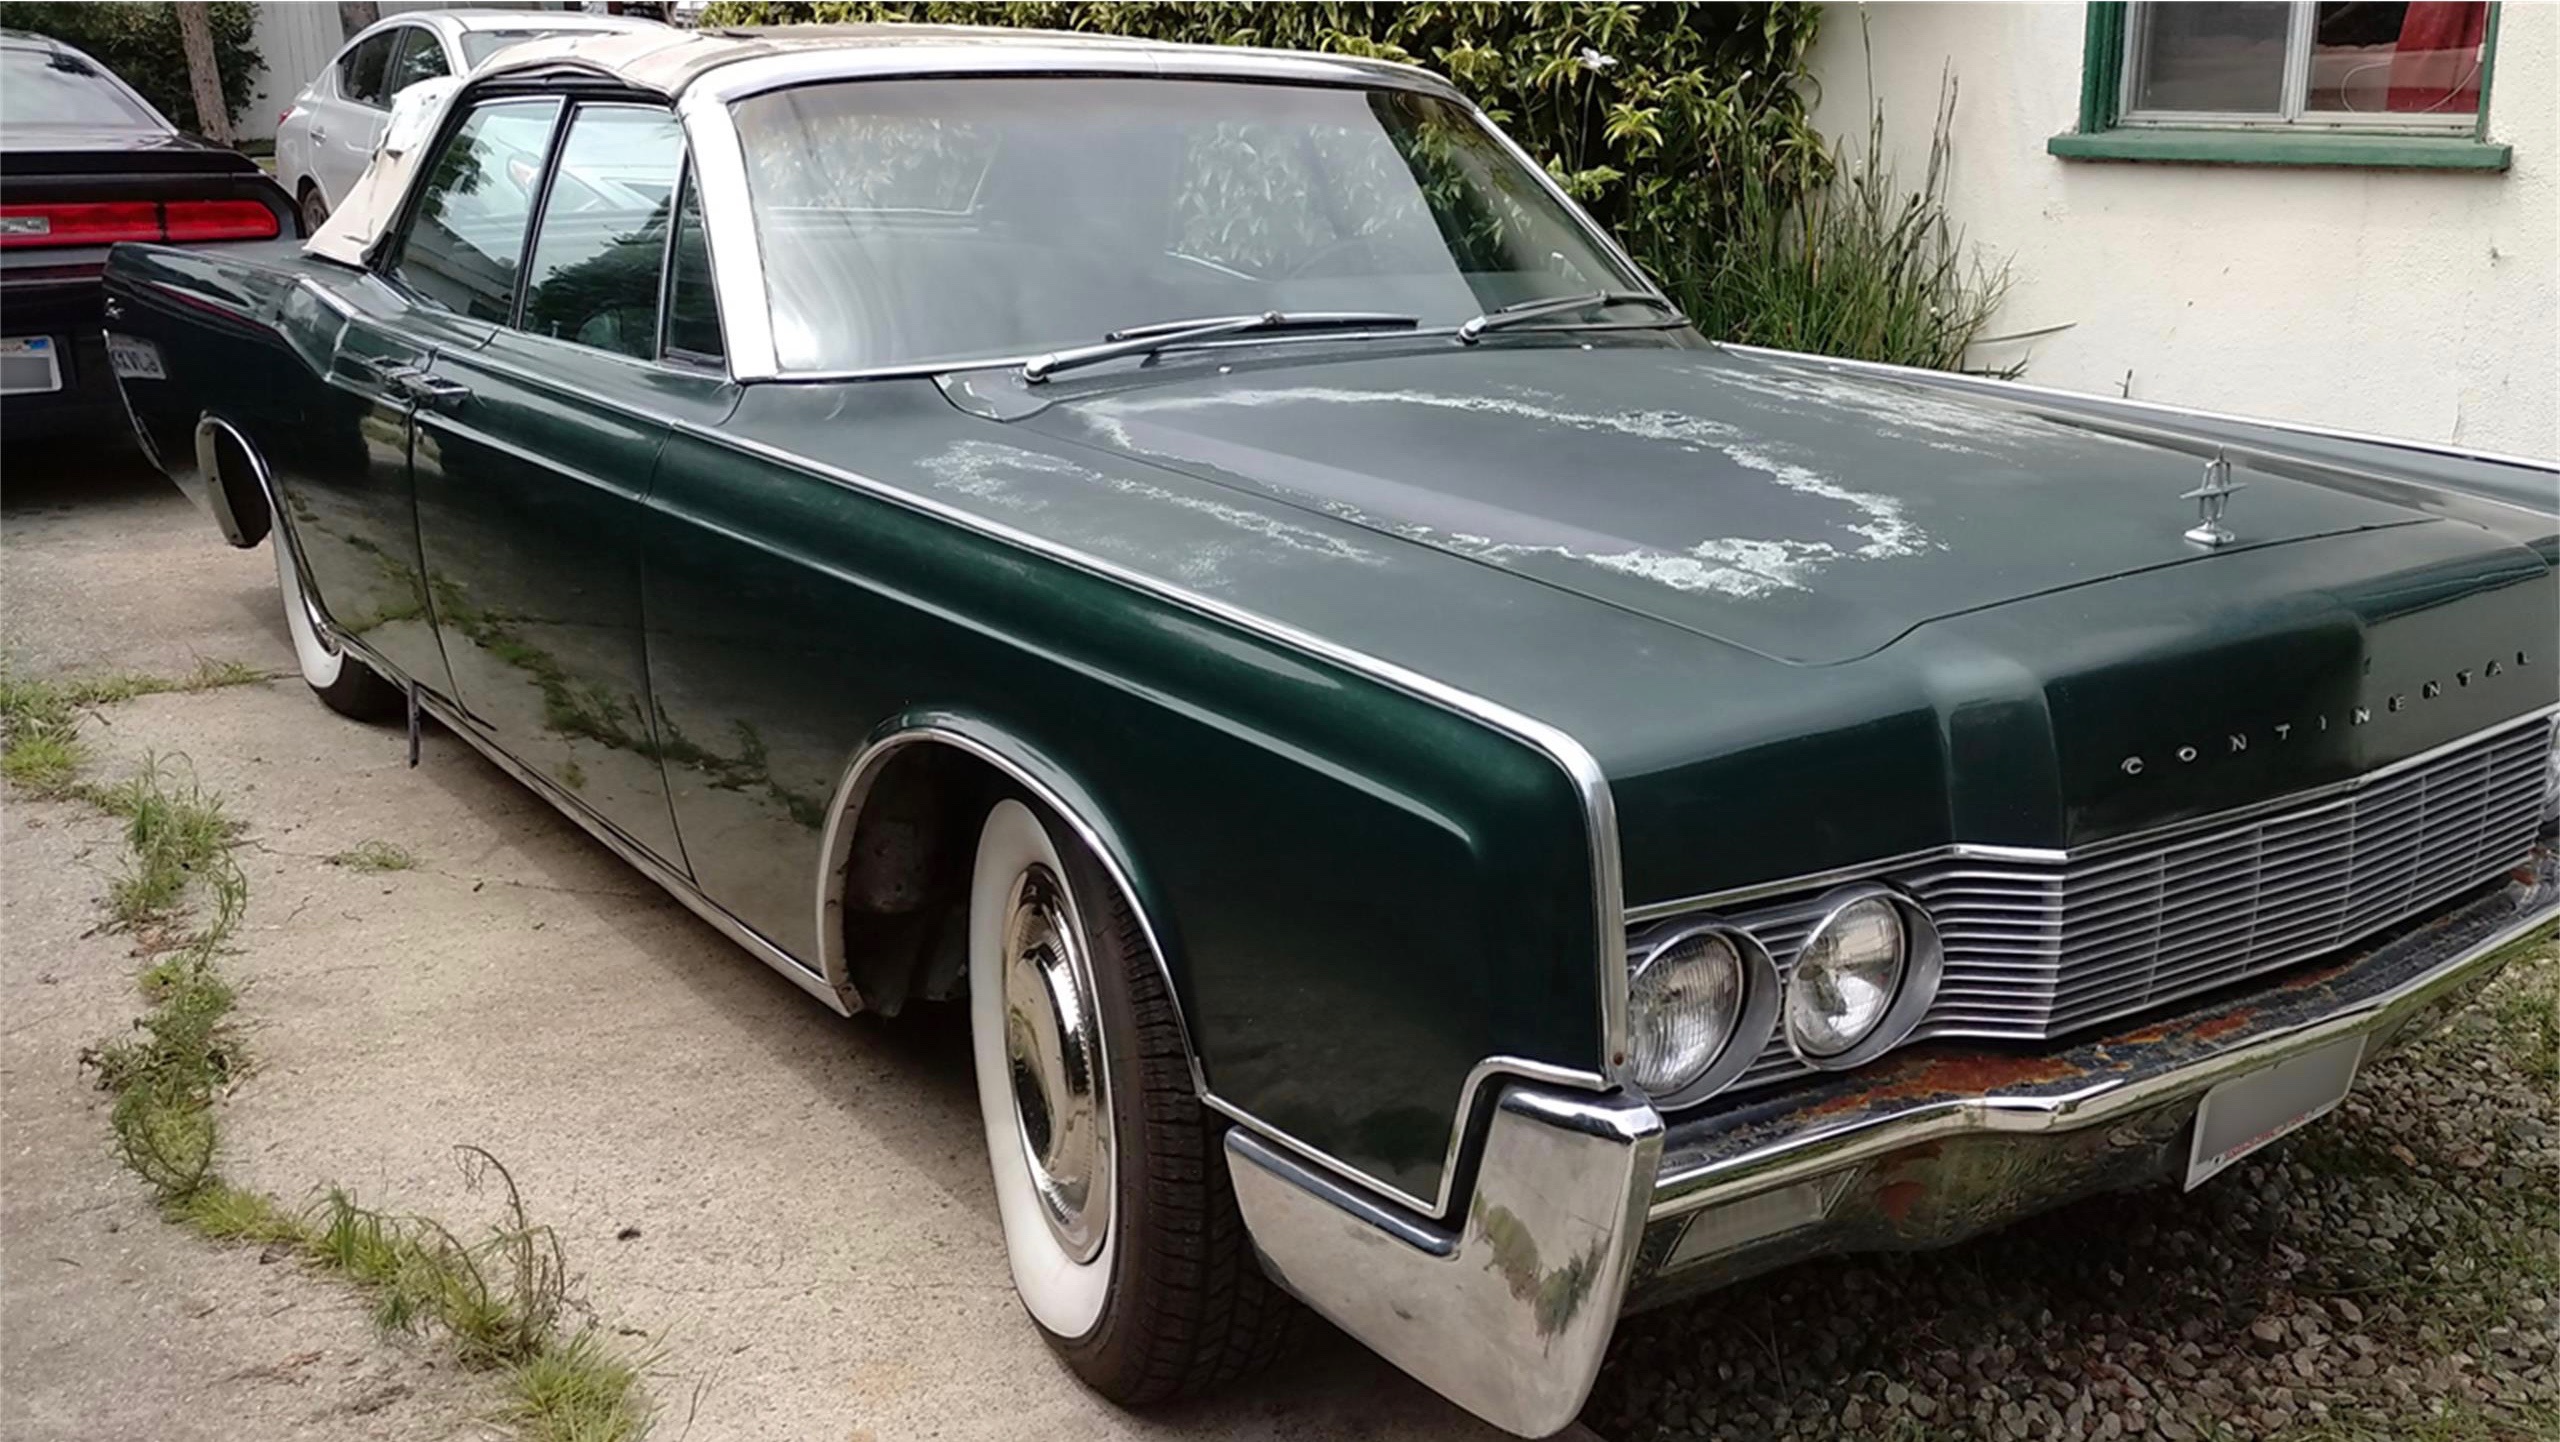 1967 Lincoln Continental, Here’s a $6,700 canvas for your car restoration artistry, ClassicCars.com Journal